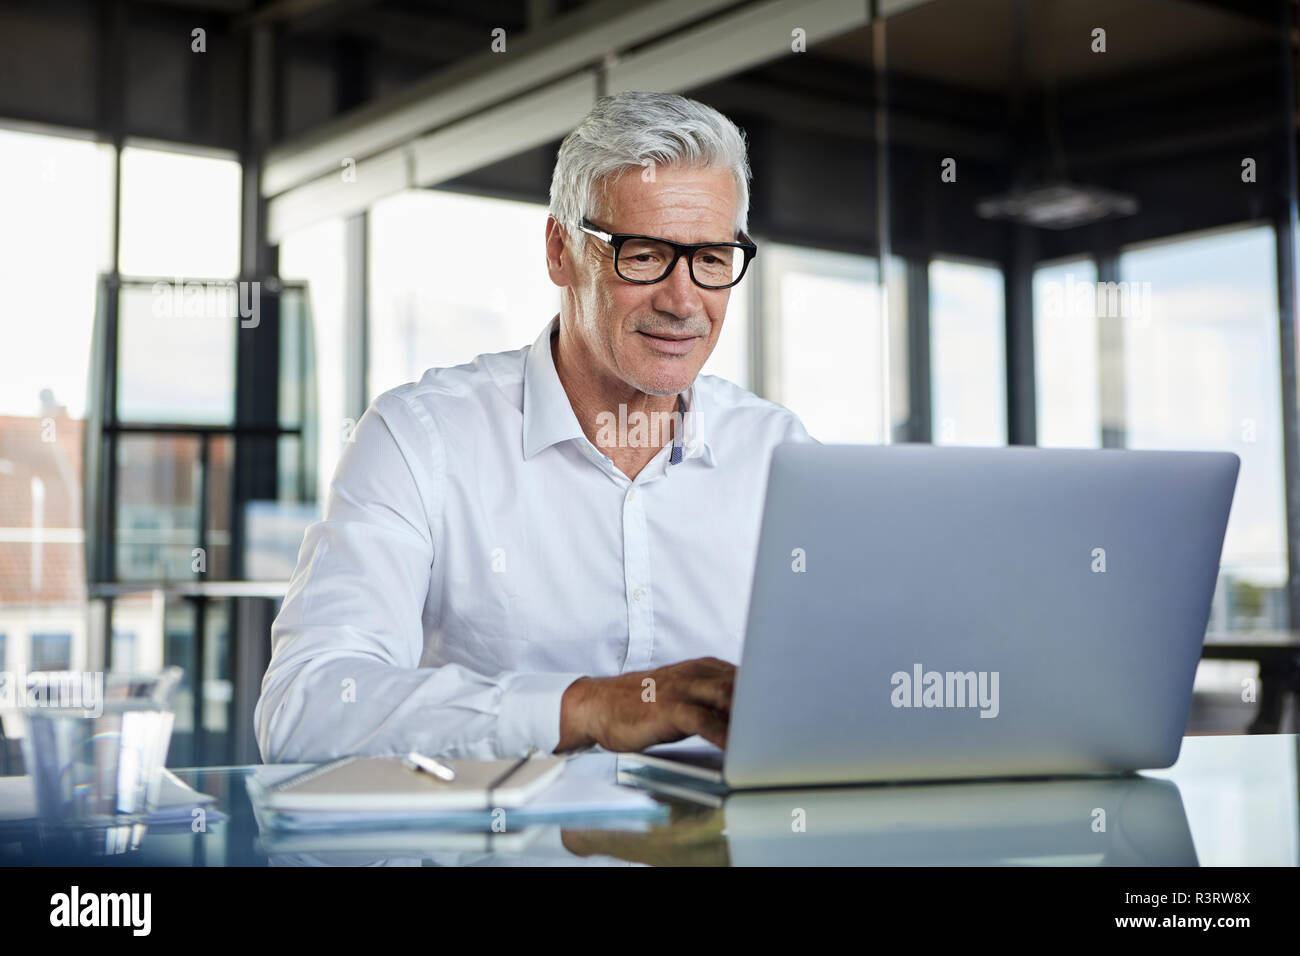 Businessman working in office, using laptop Stock Photo